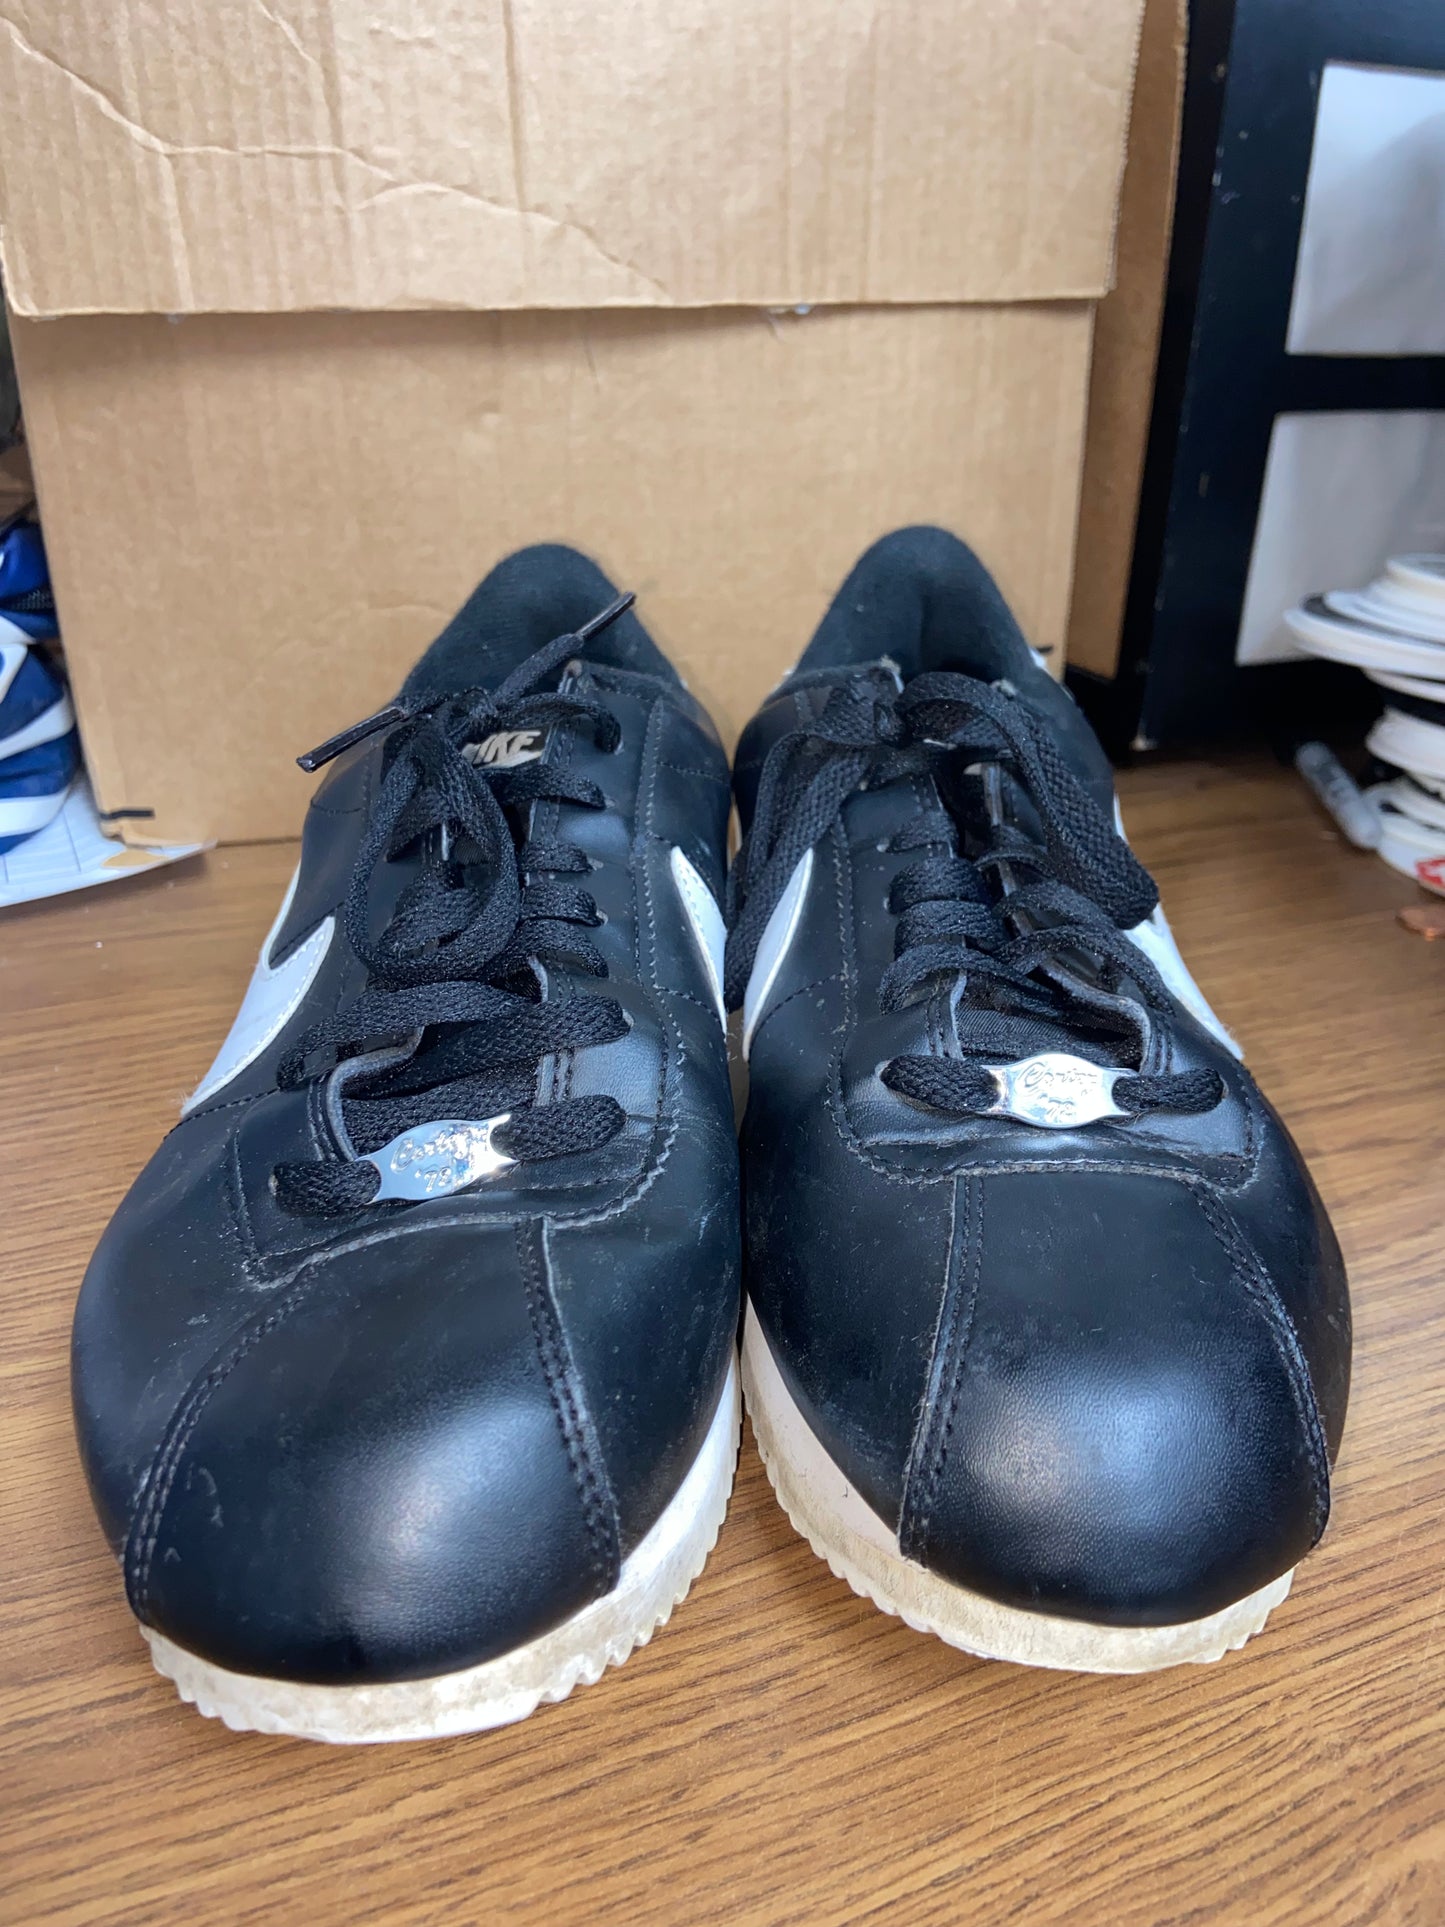 Nike Cortez Black and White Sneakers (Size 10)